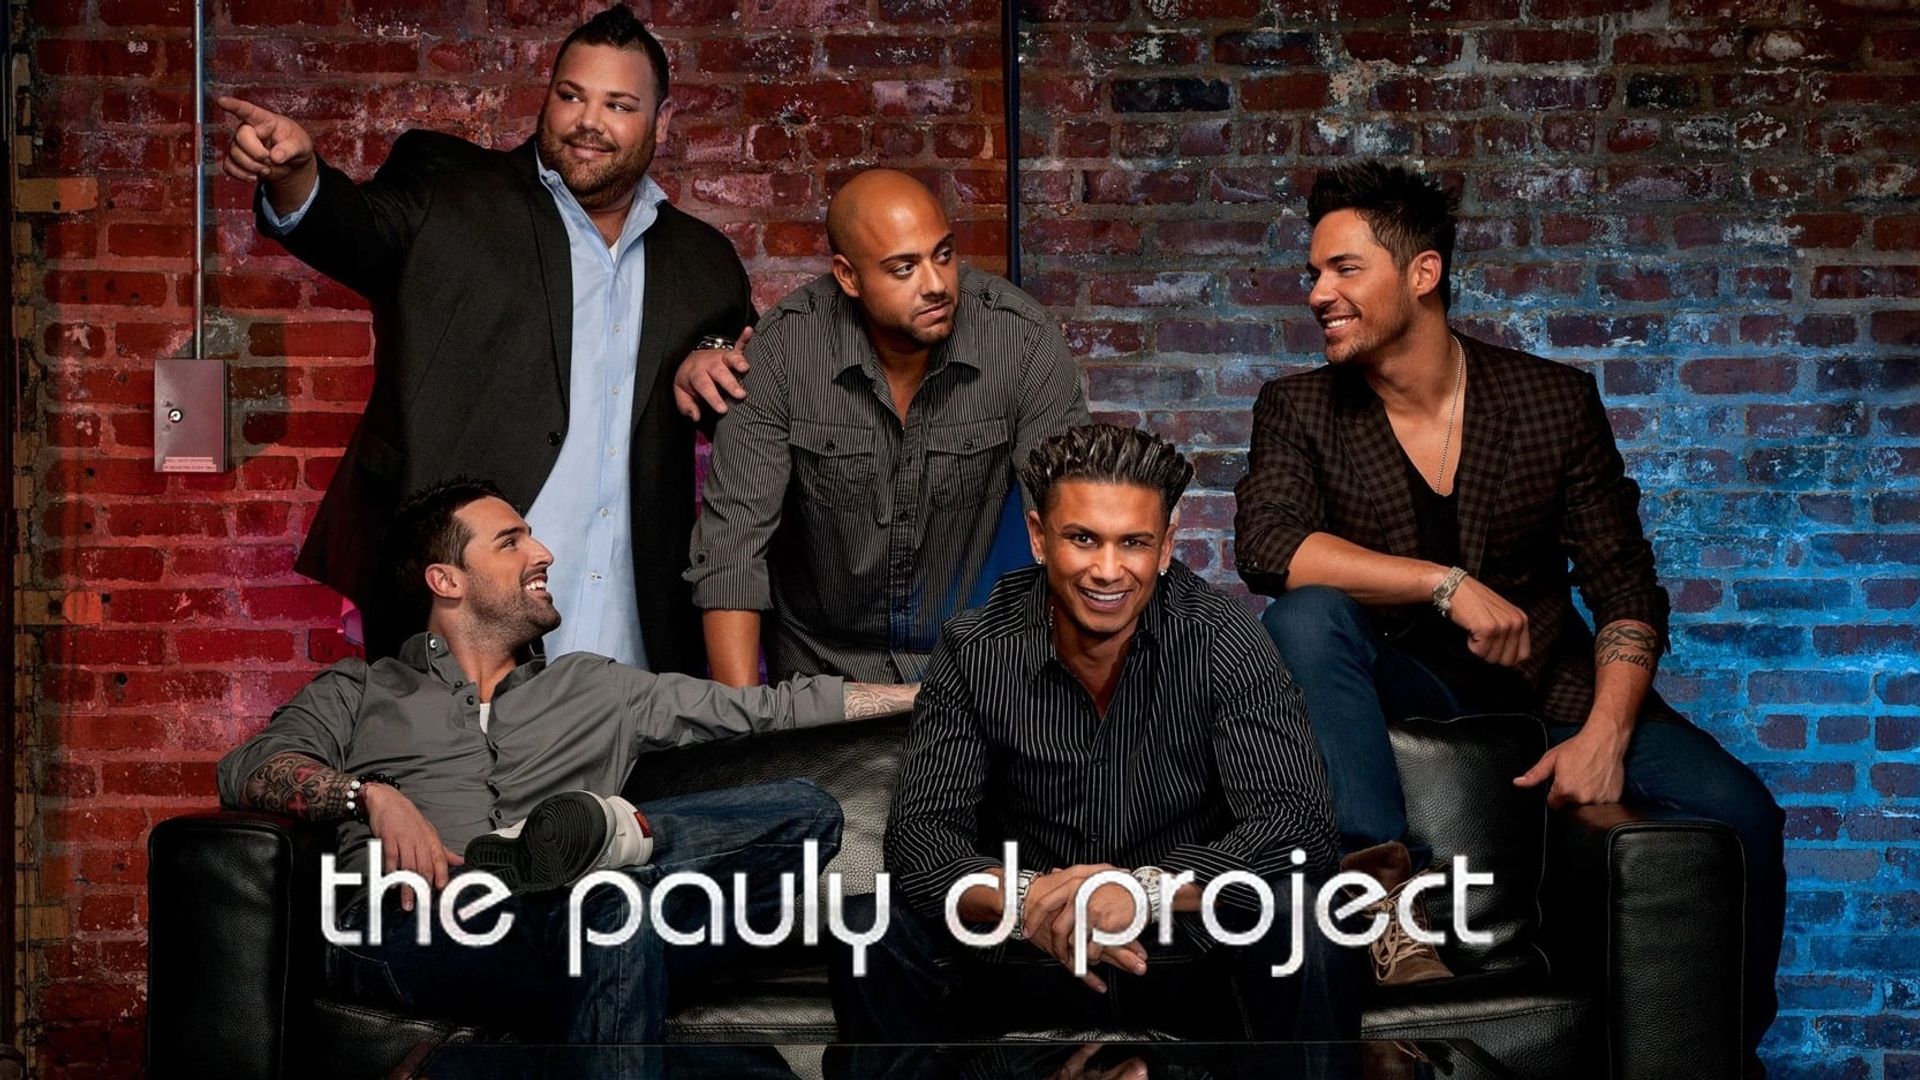 The Pauly D Project background